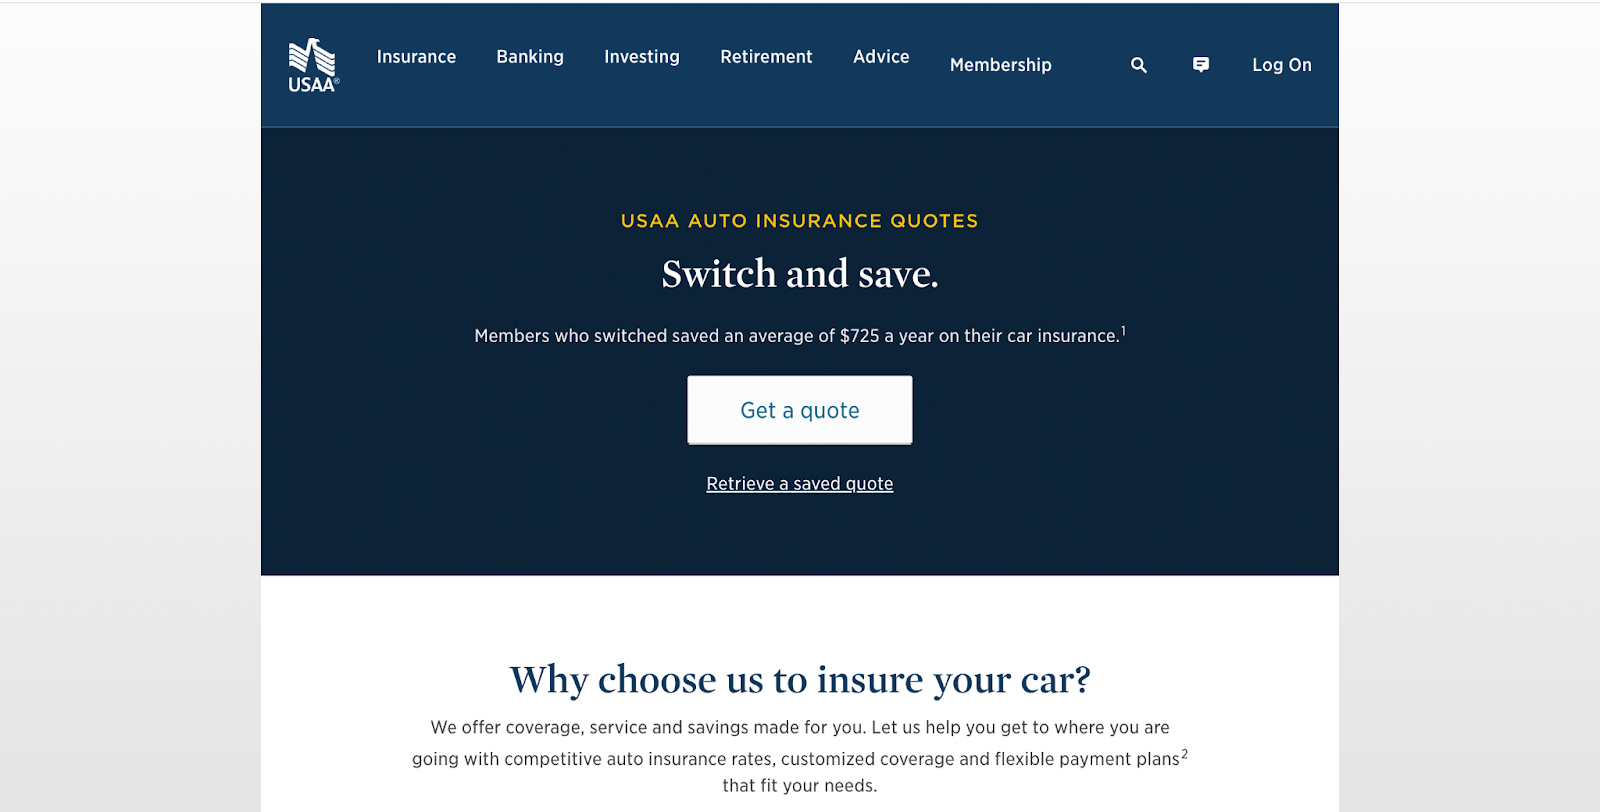 Insurance website design, example from USAA Insurance